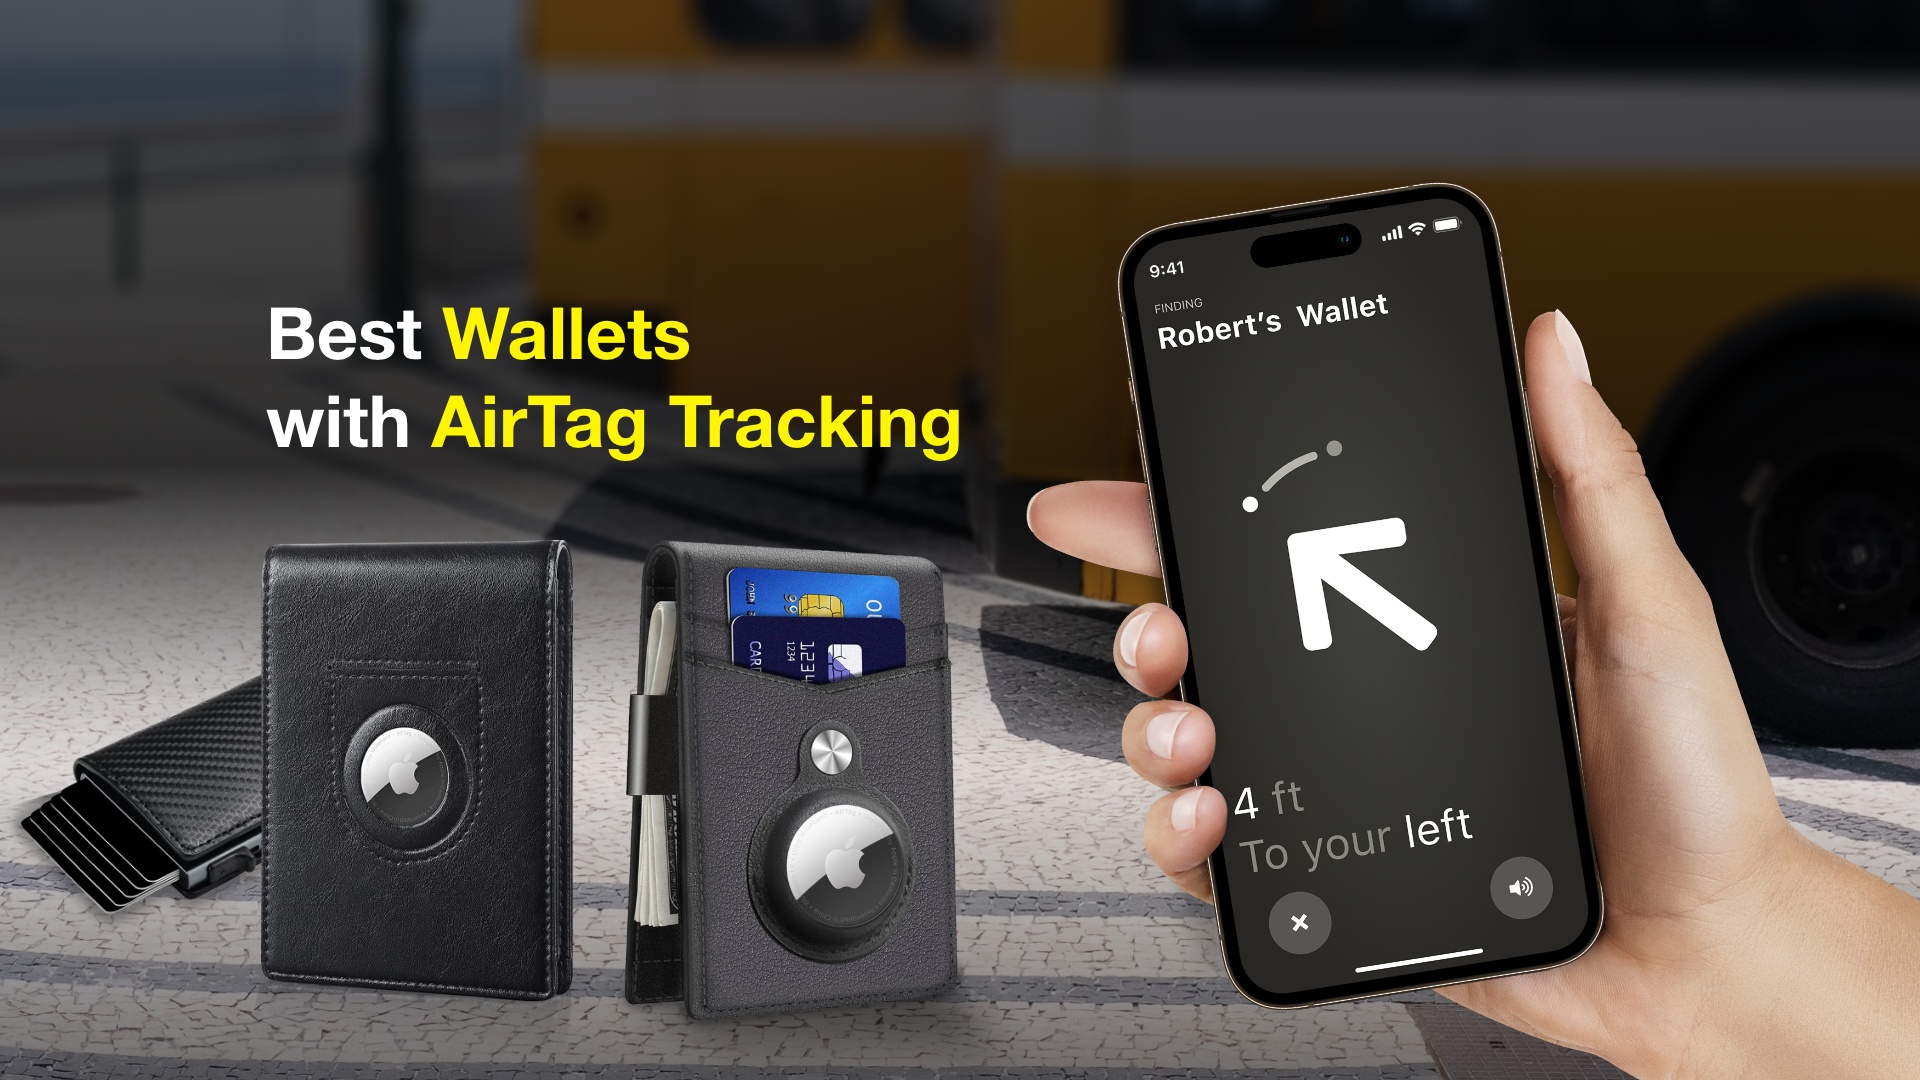 Best Walletswith AirTag Tracking